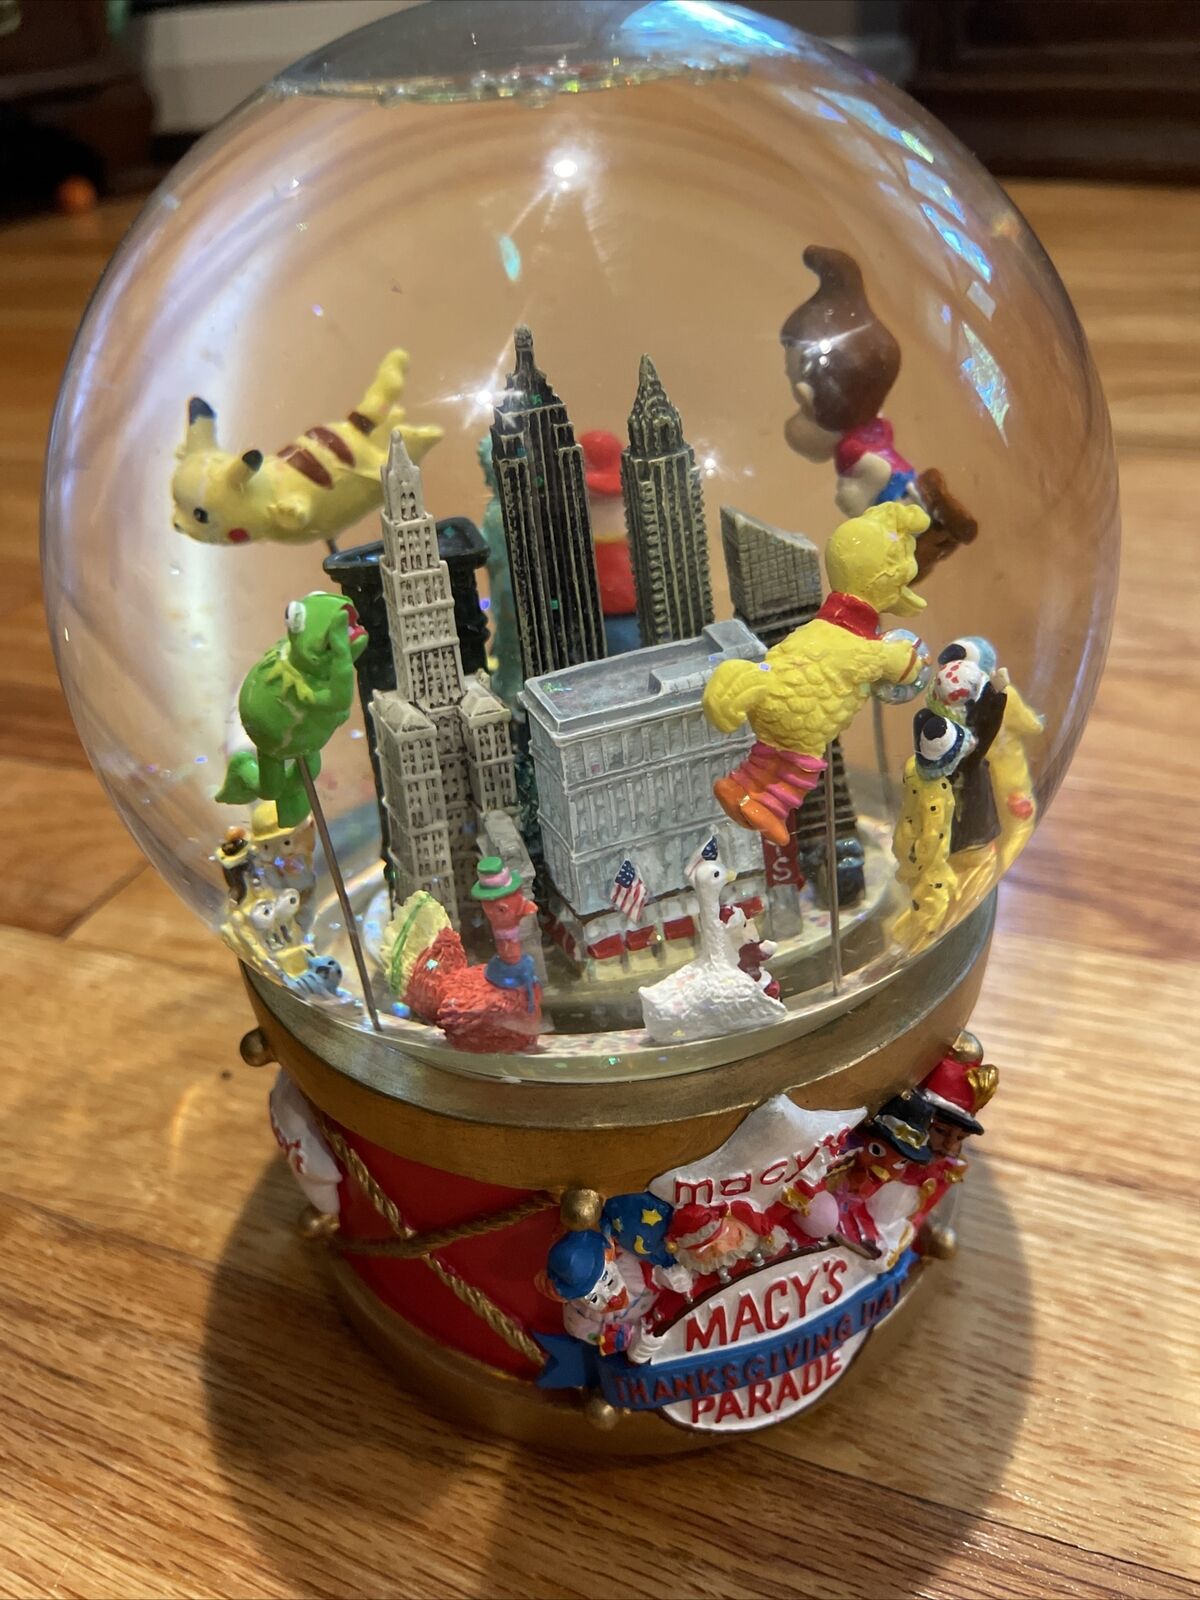 2002 Macy’s Thanksgiving Day Parade Musical Snow Globe